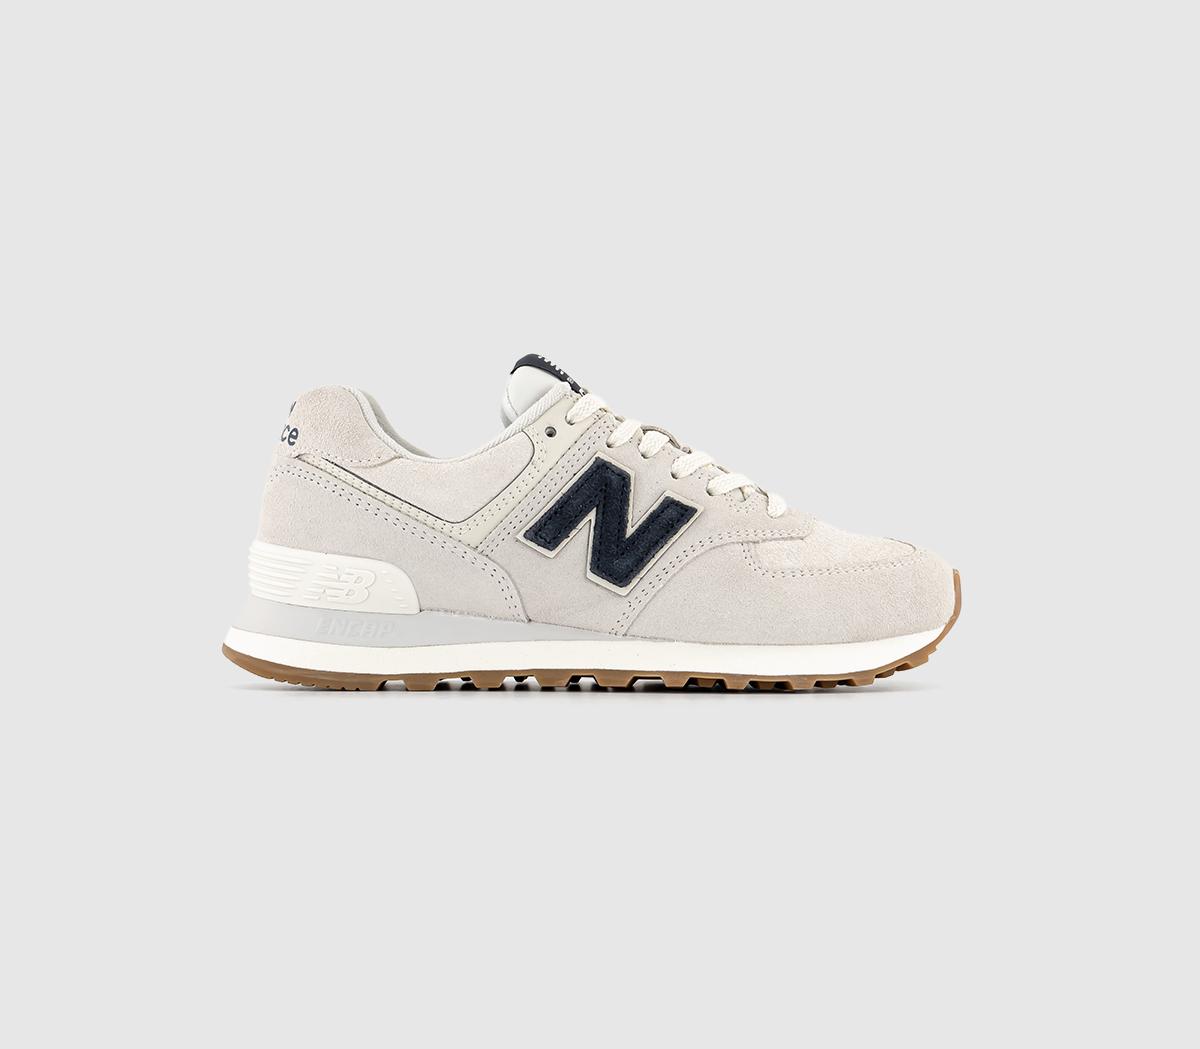 New Balance 574 Trainers Reflection Grey Navy - Men's Trainers